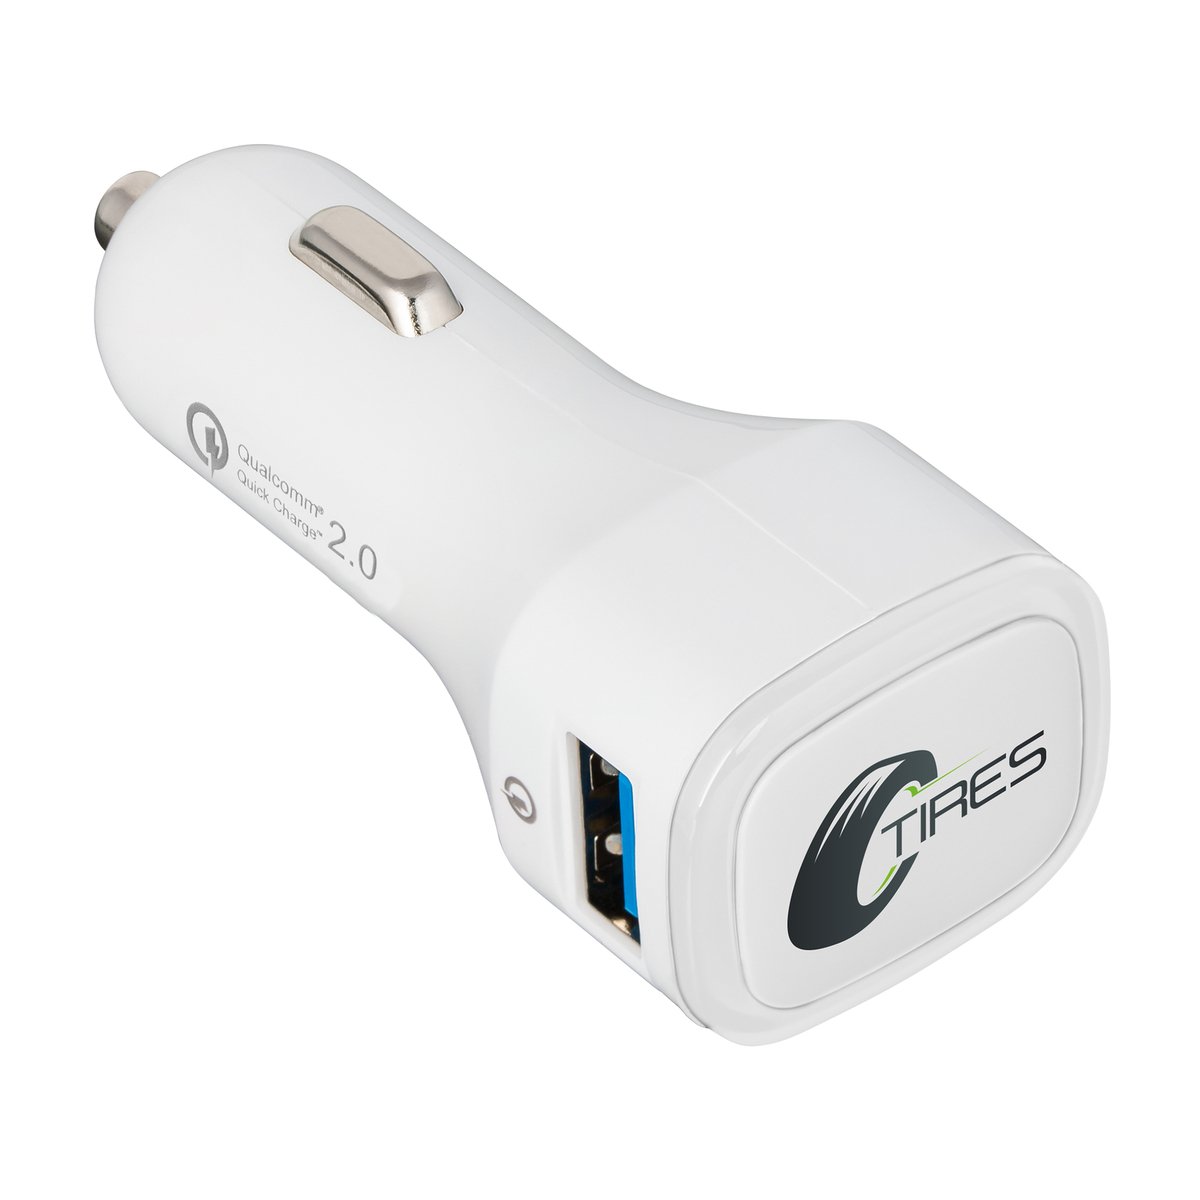 USB car charger Quick Charge 2.0® COLLECTION 500 clear